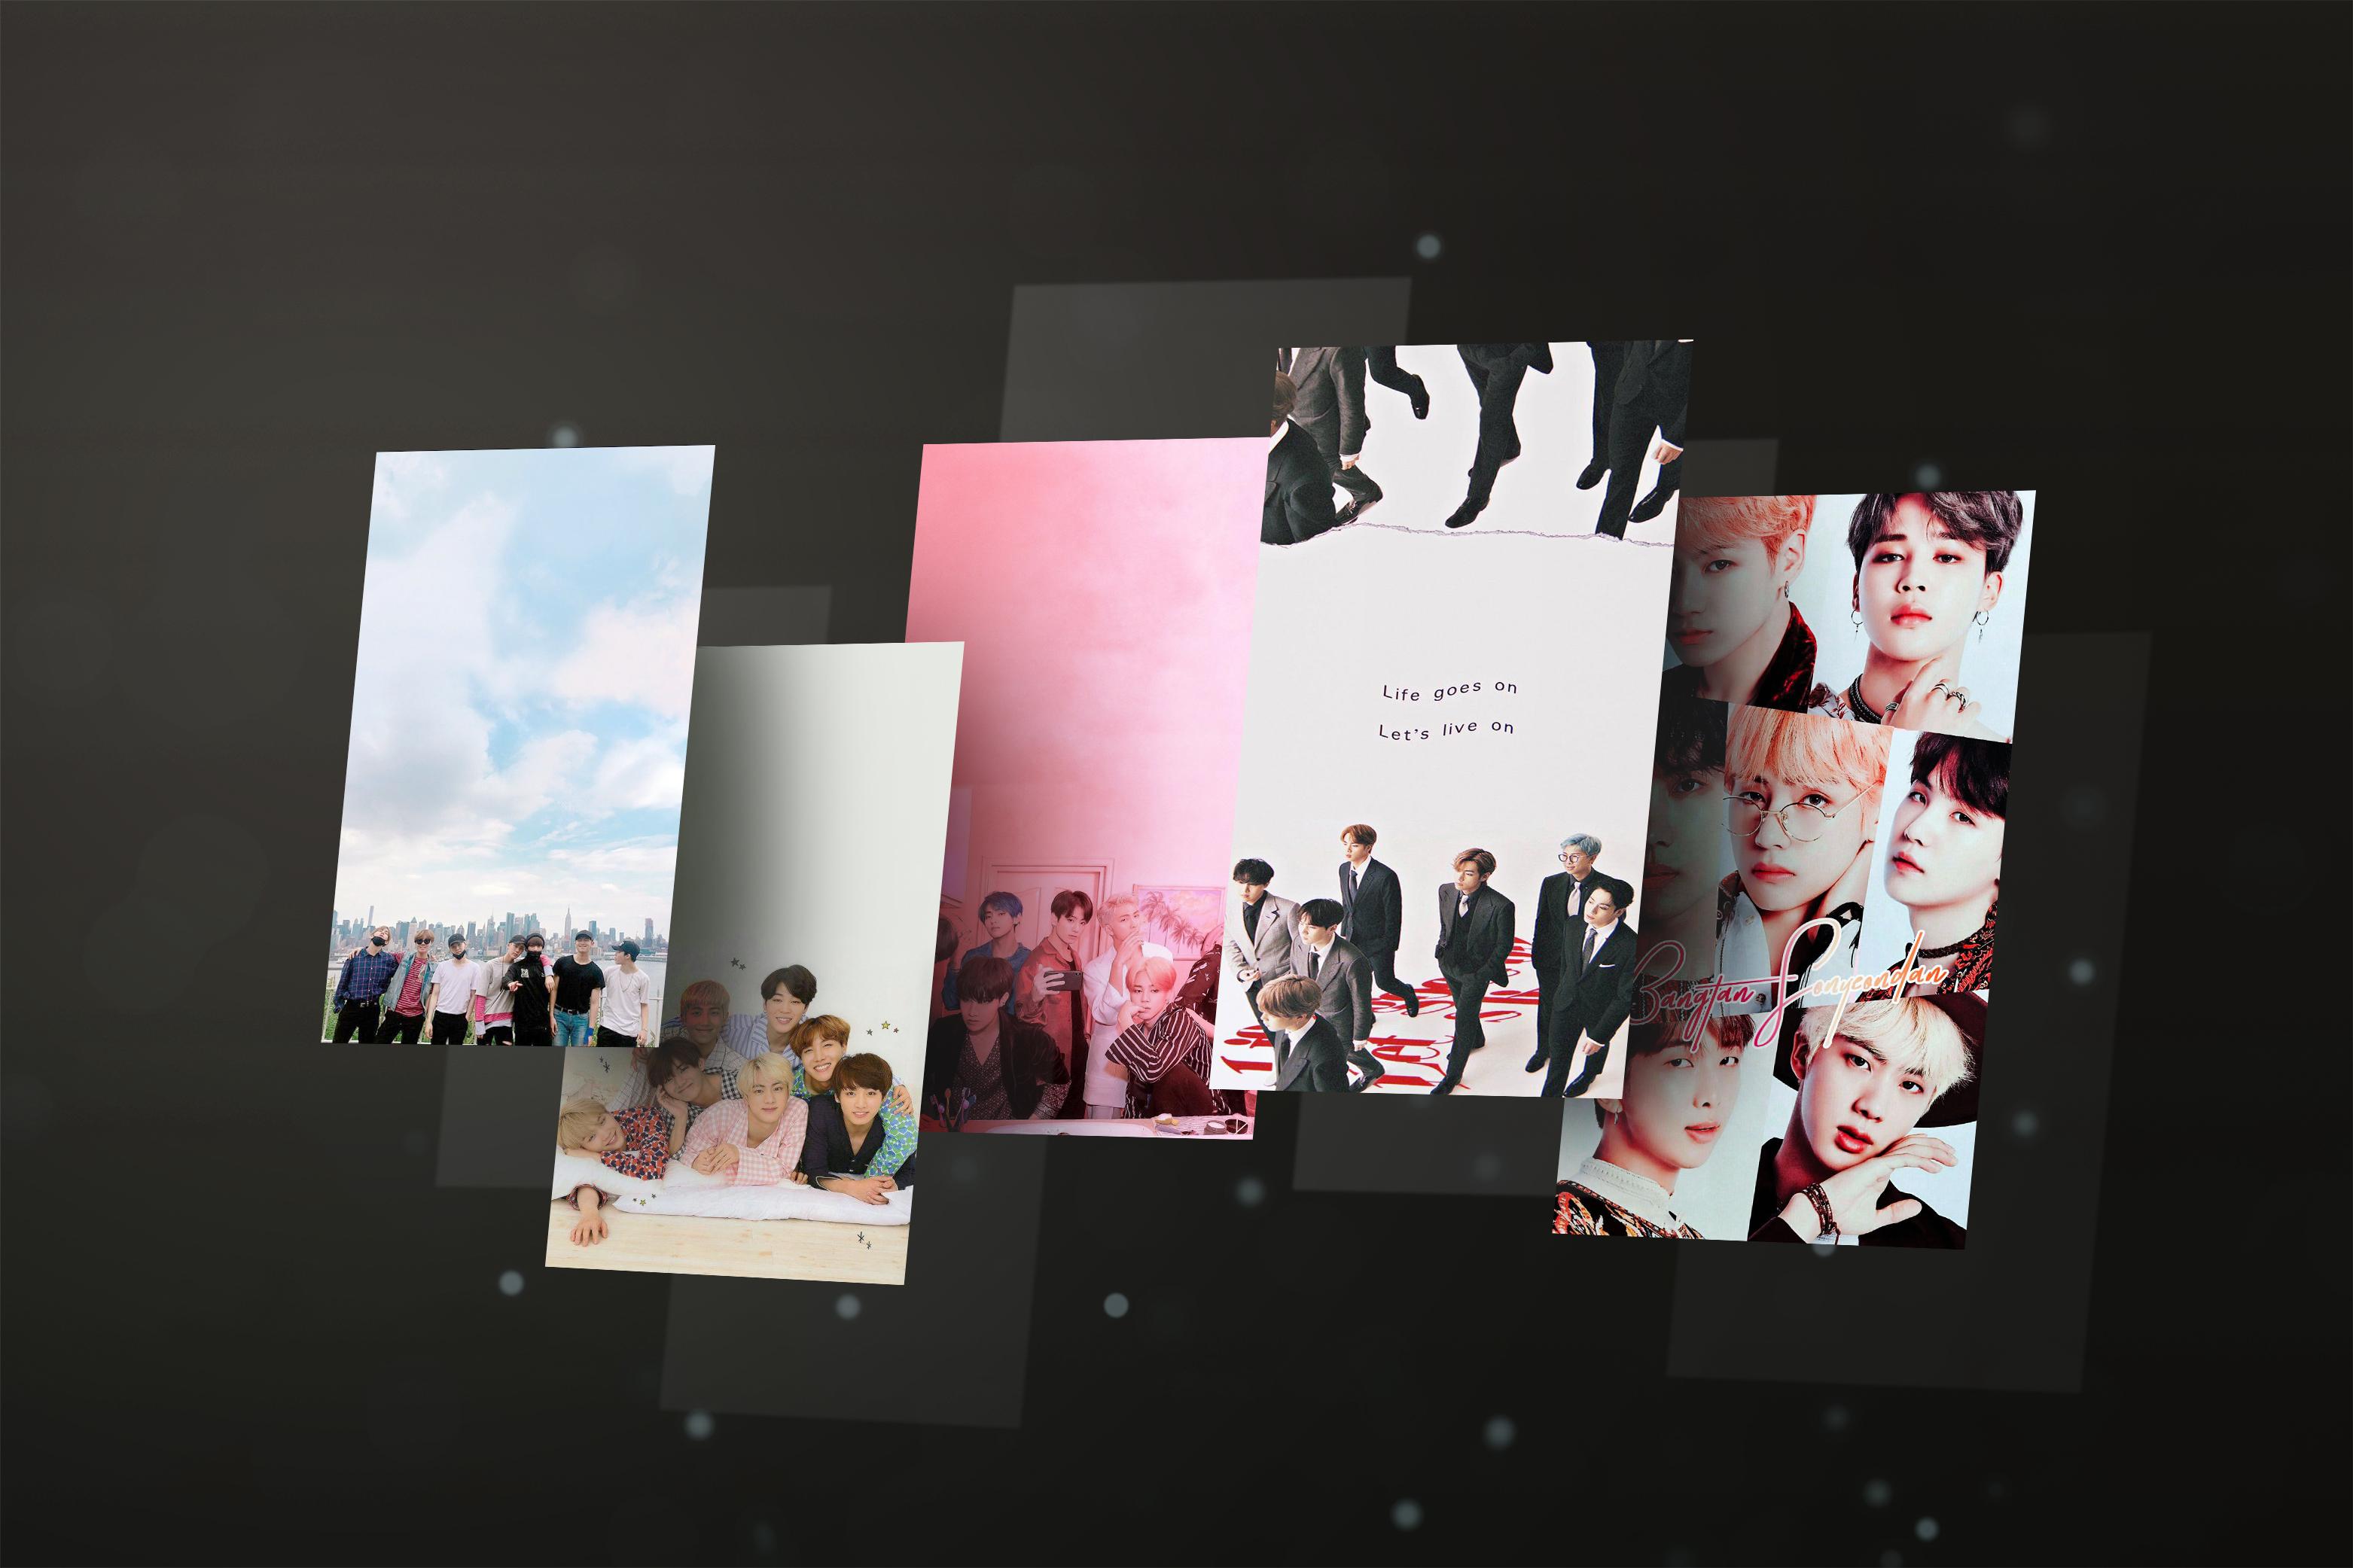 Bts Life Goes On Wallpaper For Android Apk Download